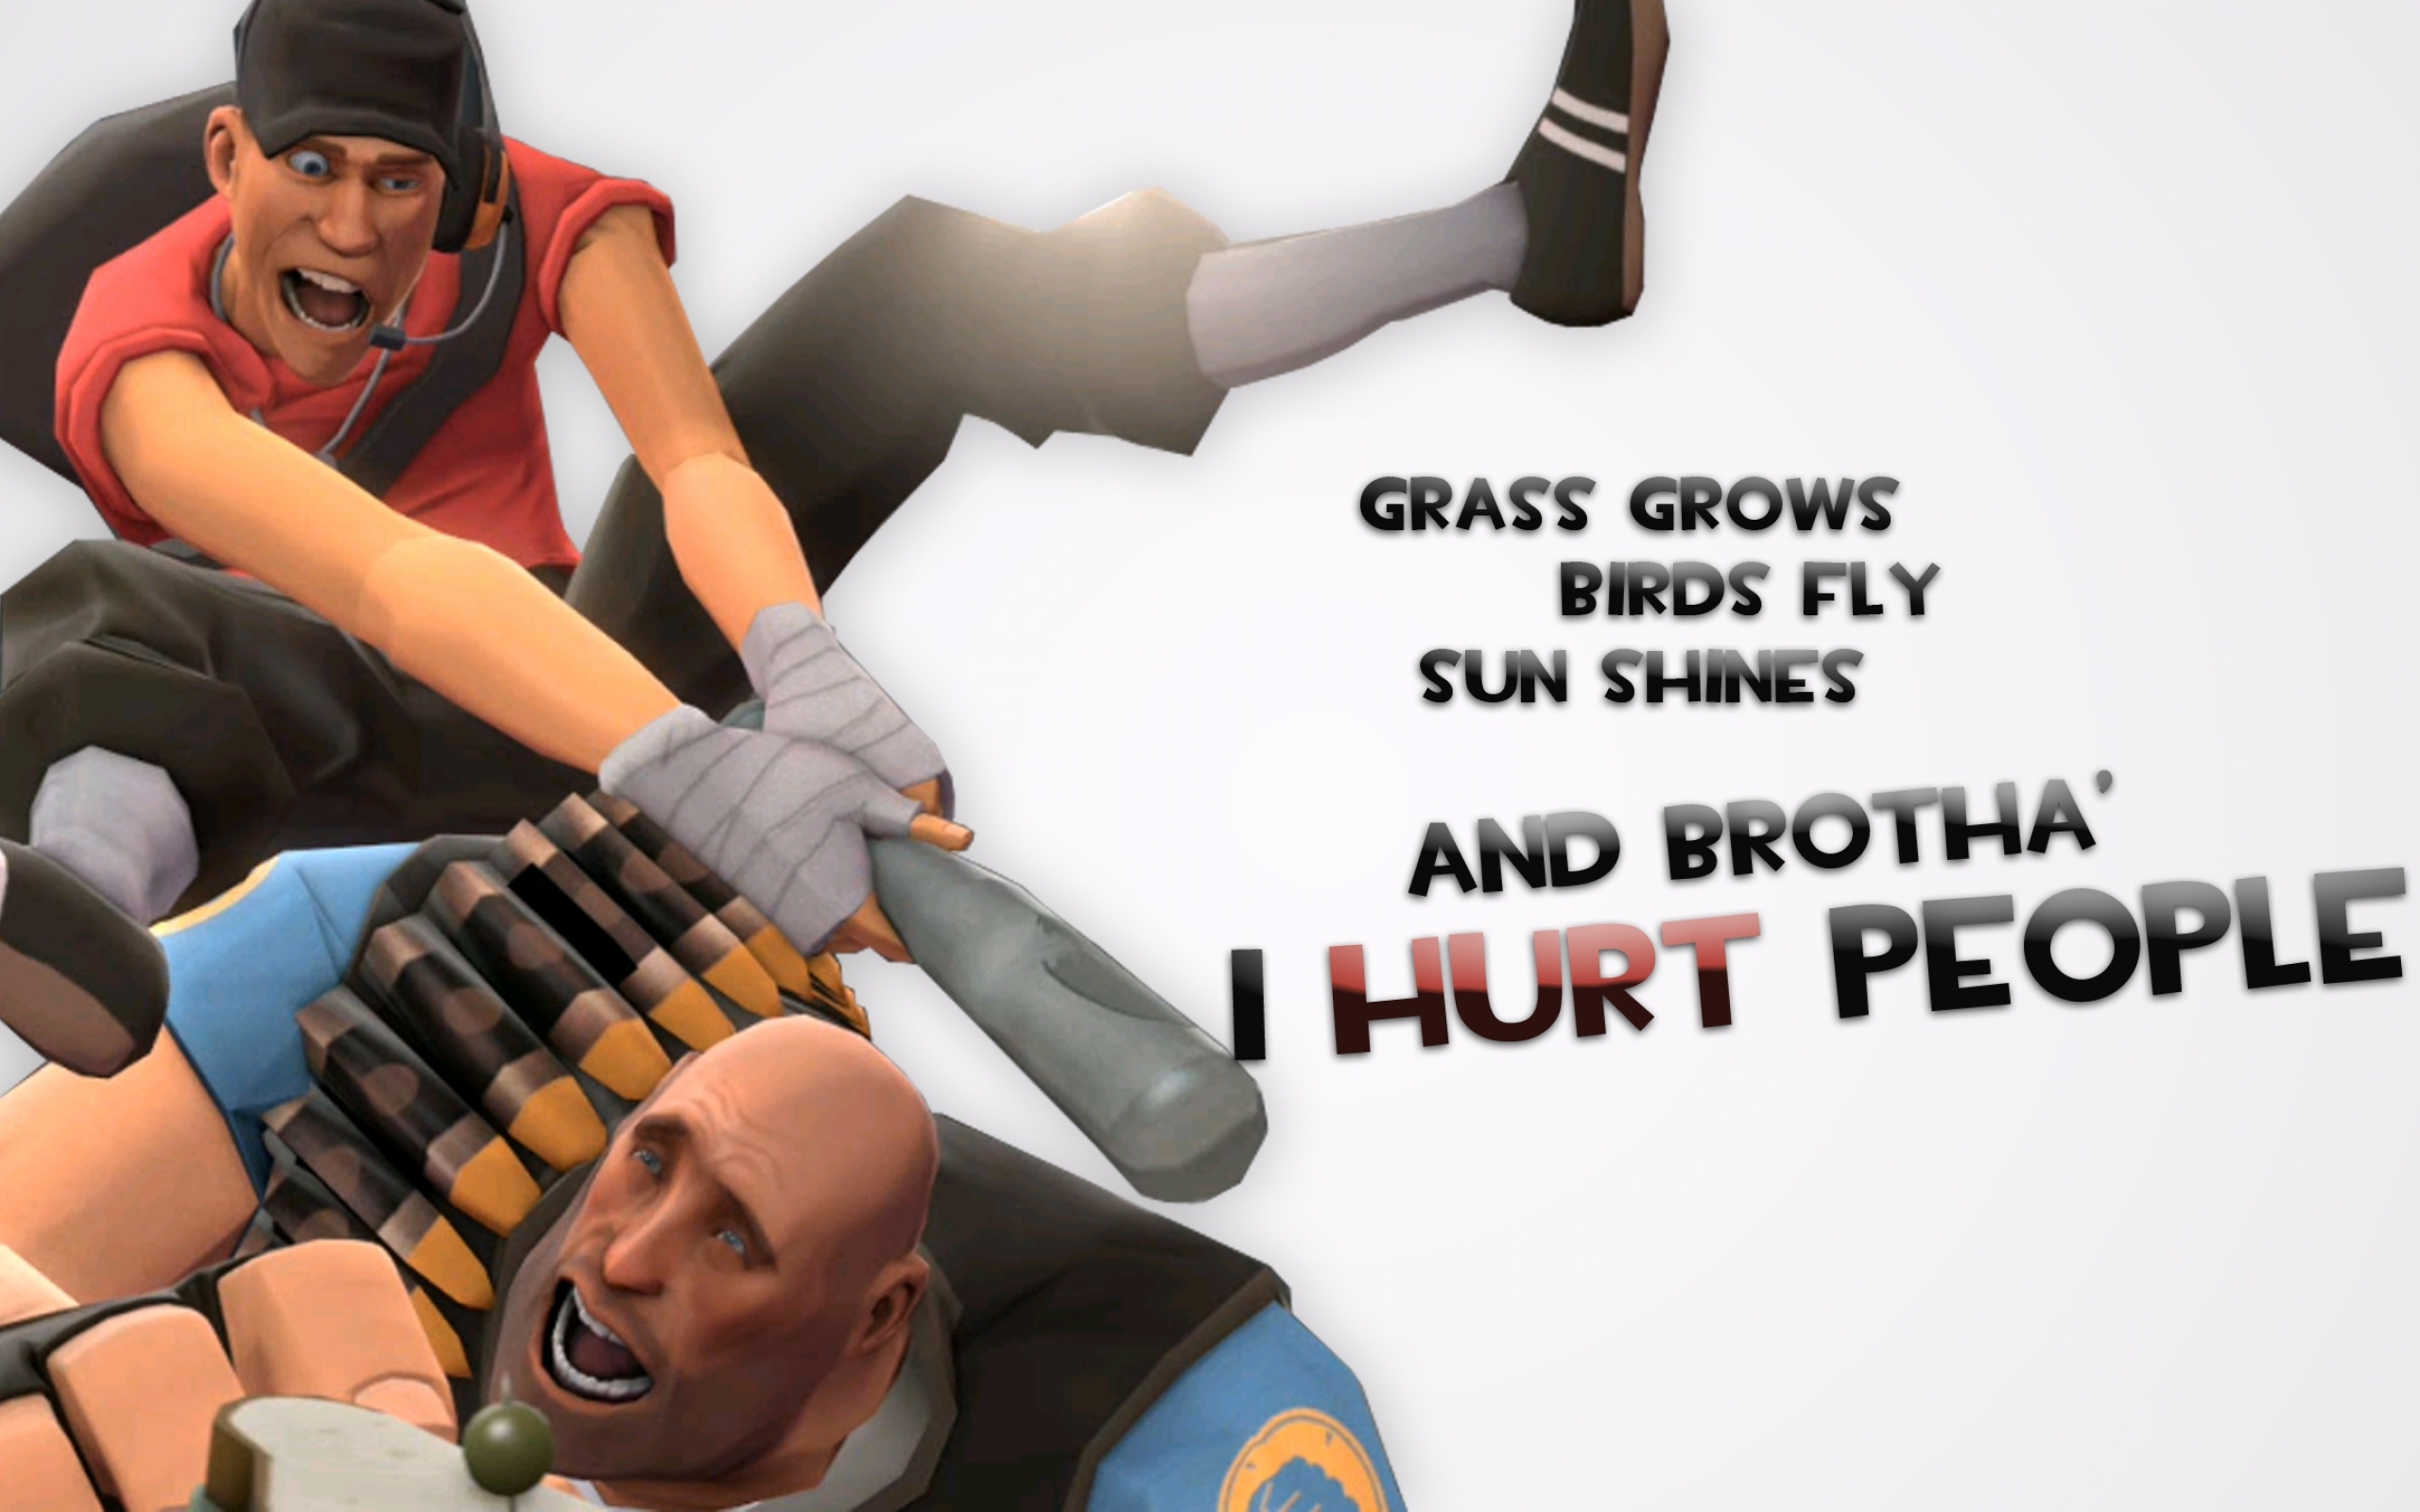 team fortress 2 mobile game